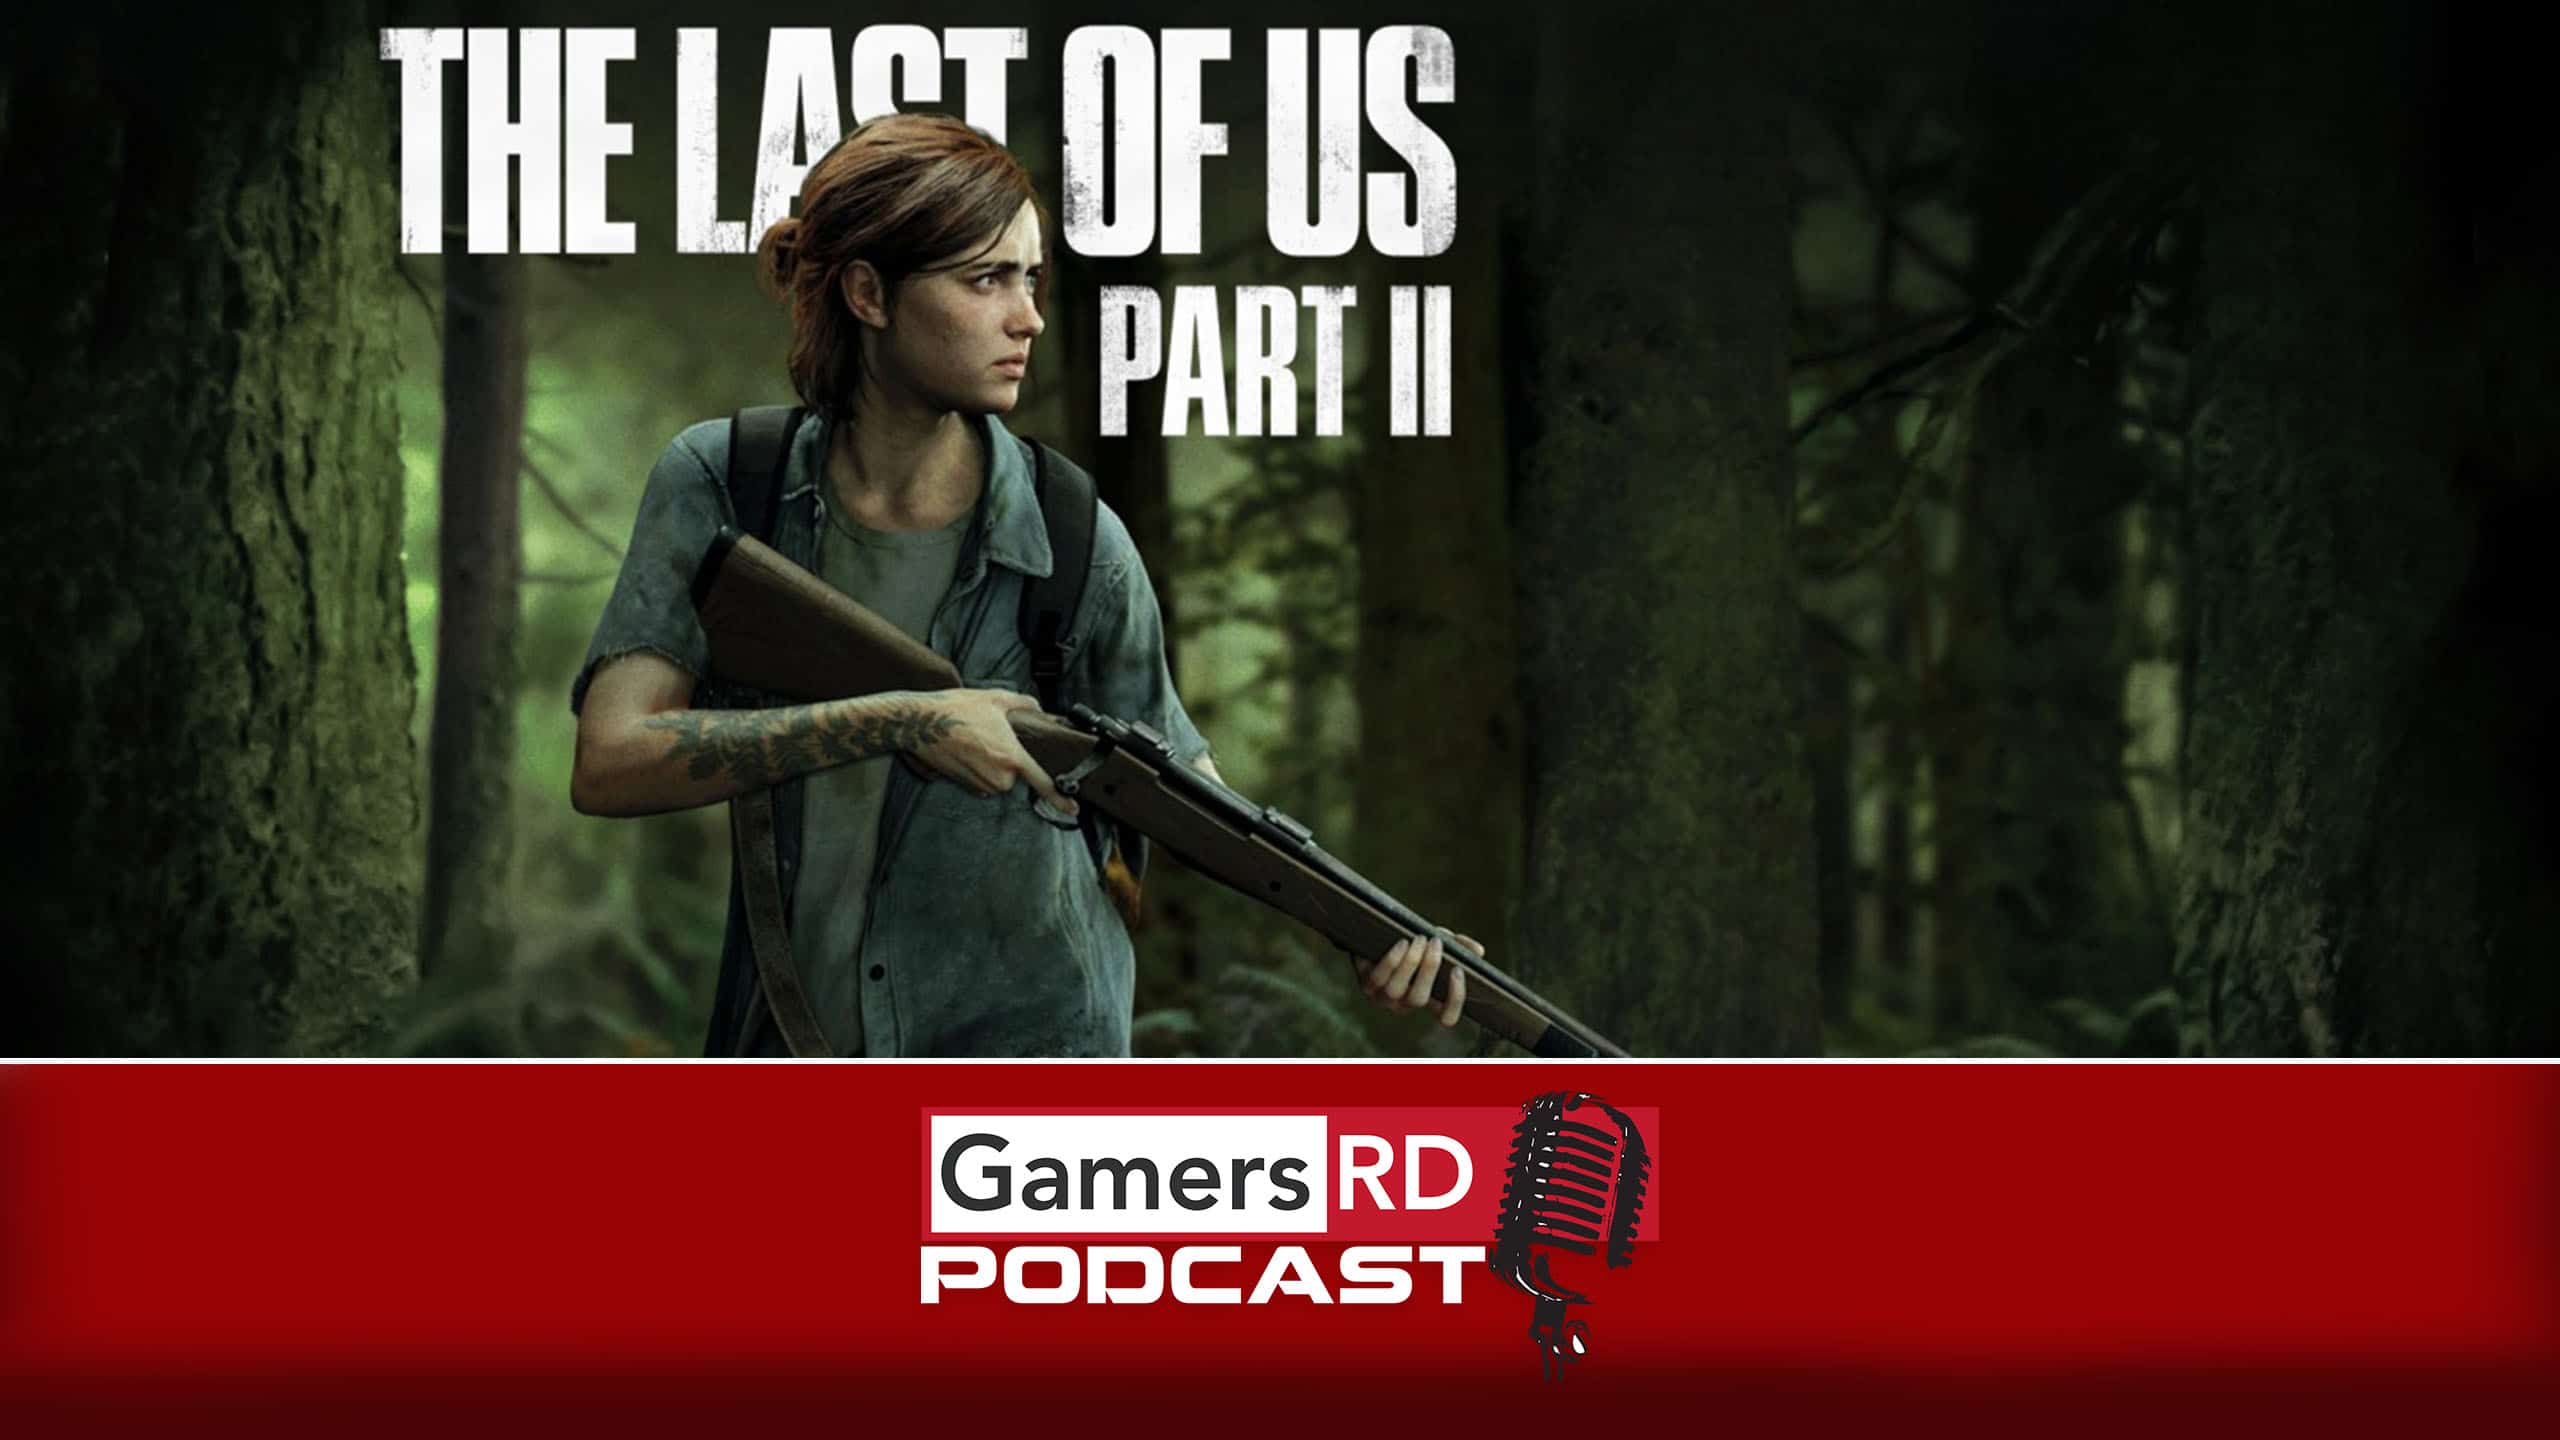 GamersRD Podcast #92 The Last of Us Part 2, PS4, Sony, Playstation